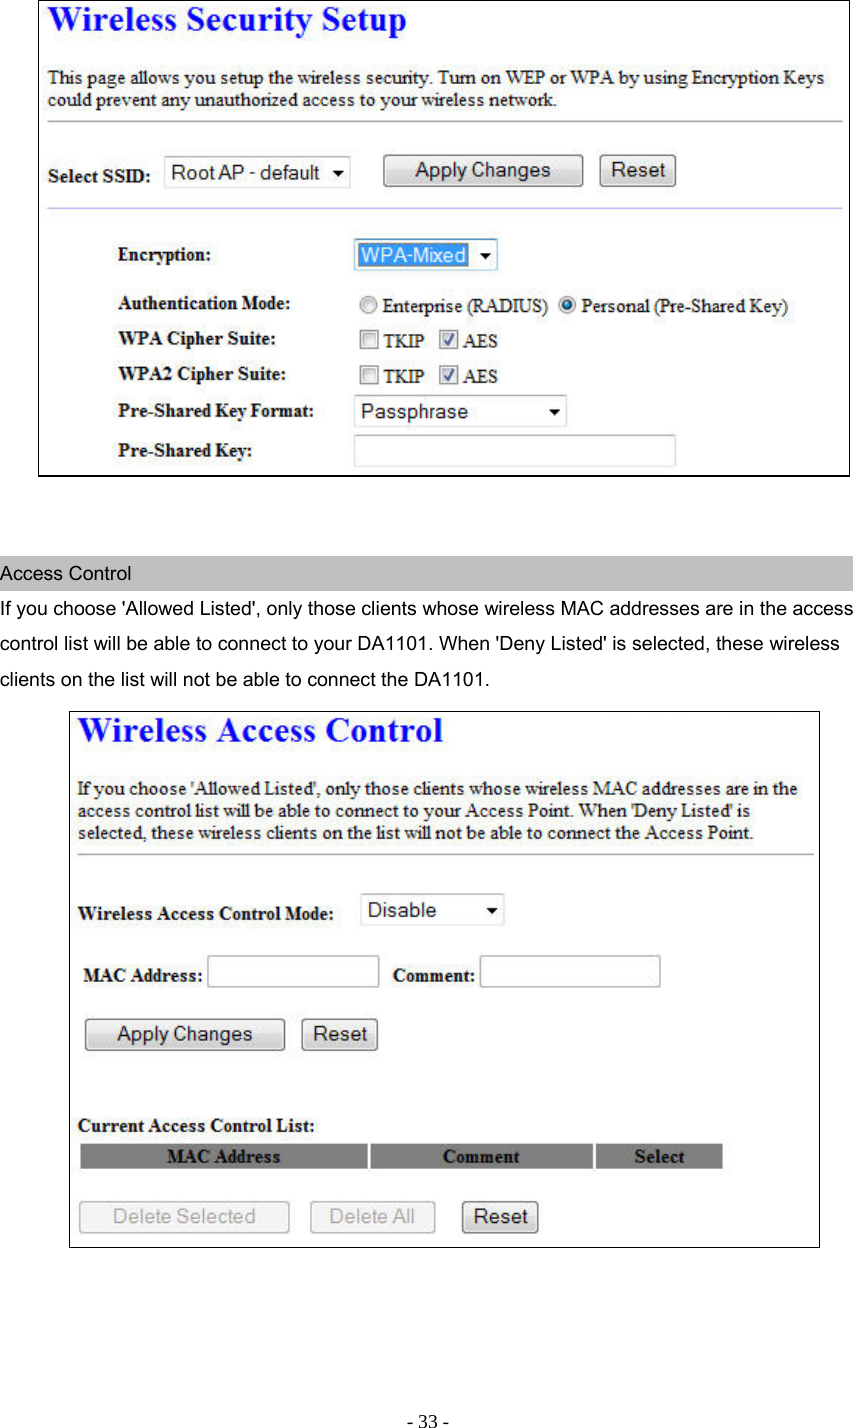 - 33 -    Access Control If you choose &apos;Allowed Listed&apos;, only those clients whose wireless MAC addresses are in the access control list will be able to connect to your DA1101. When &apos;Deny Listed&apos; is selected, these wireless clients on the list will not be able to connect the DA1101.   